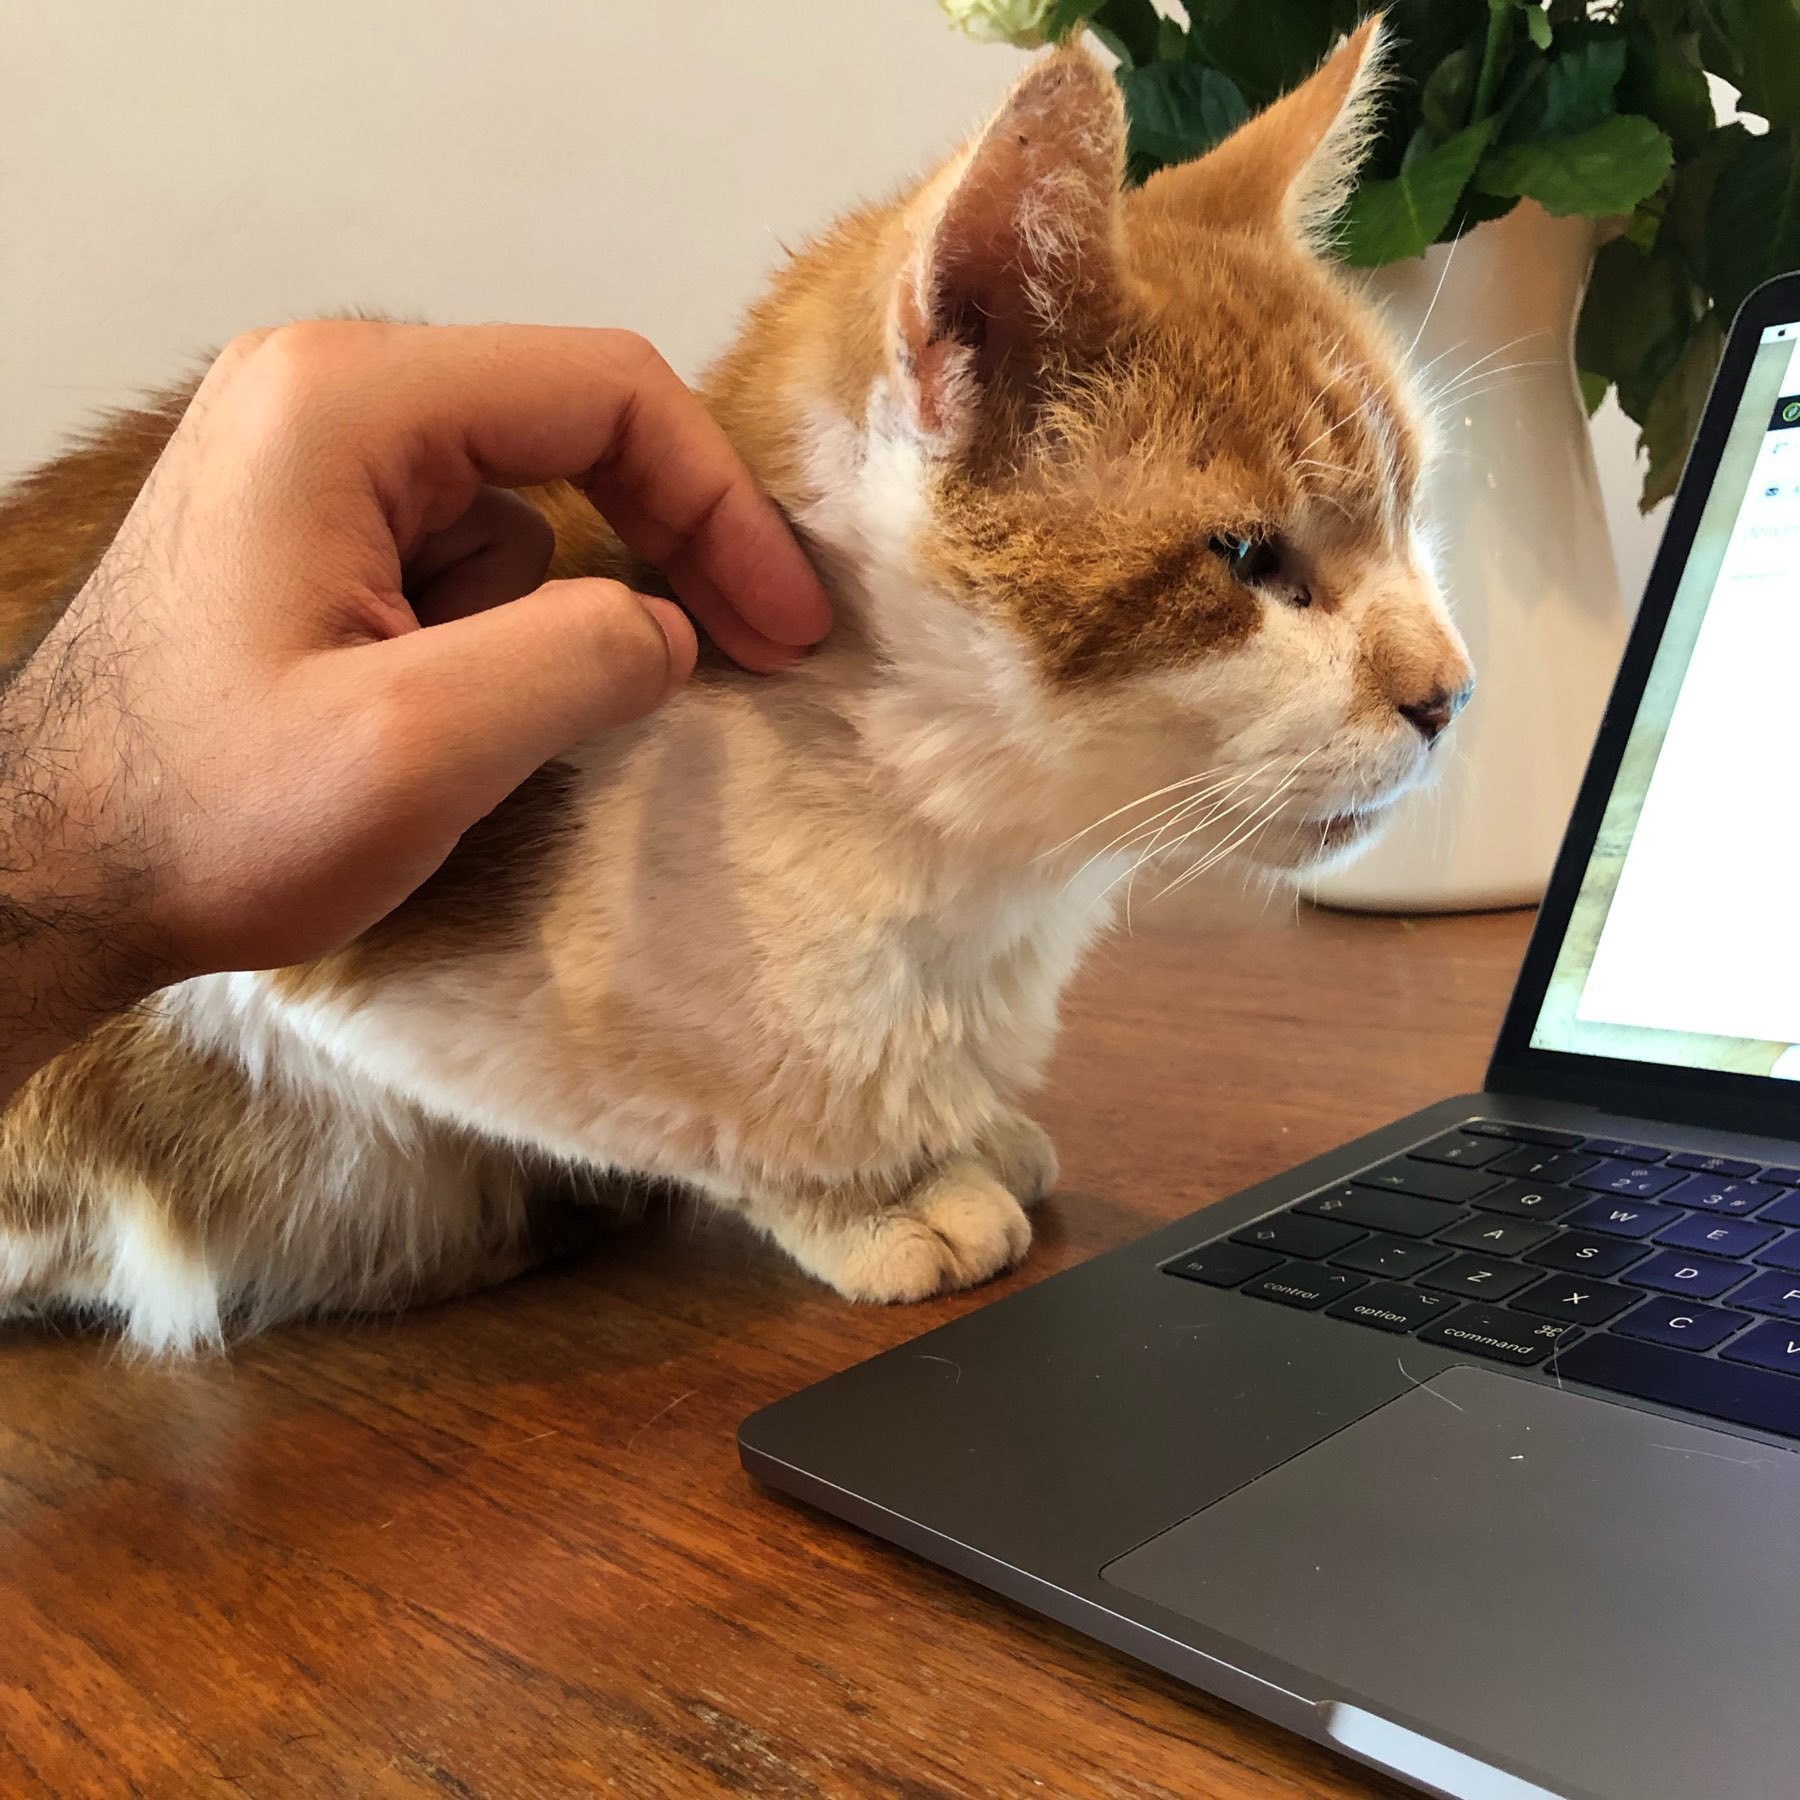 Skippy the cat, with nice ginger and white markins chilling looking at the laptop